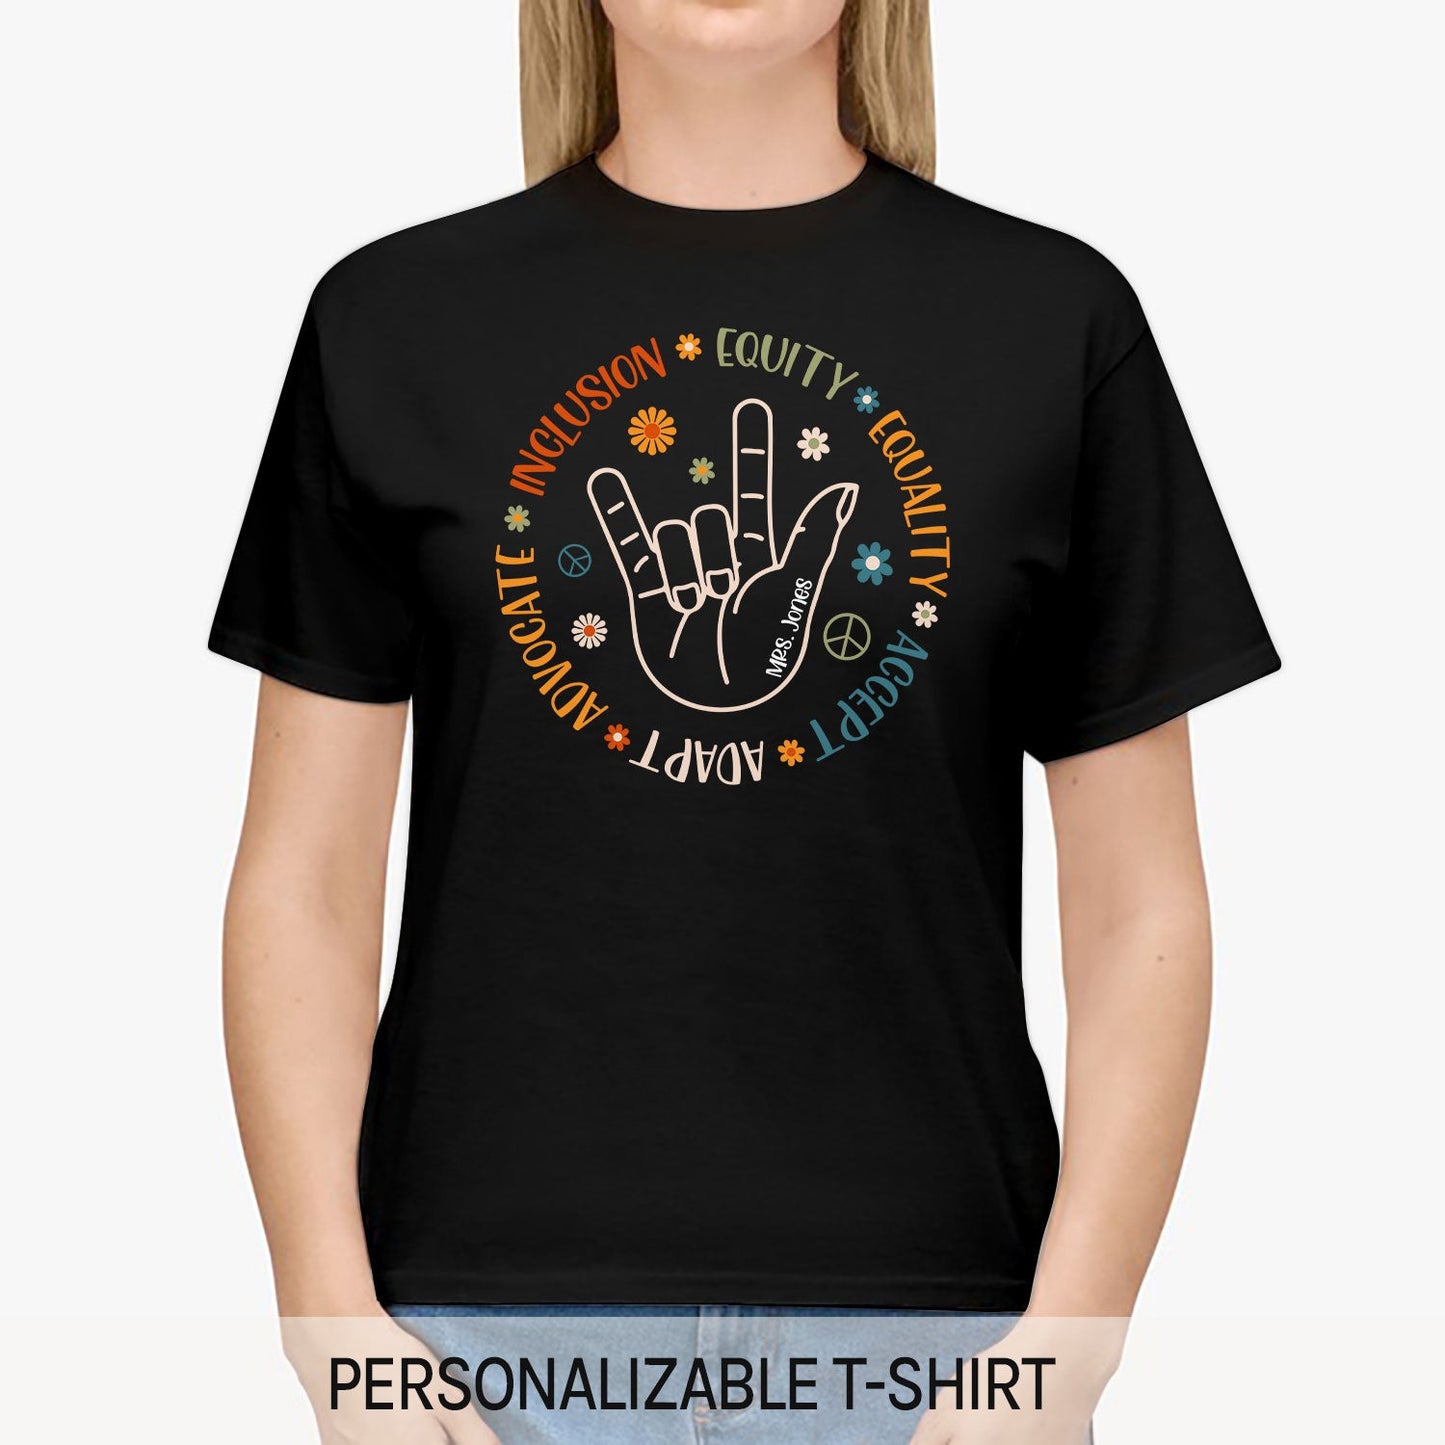 Inclusion, Equity, Equality, Accept, Adapt, Advocate - Personalized Birthday or Christmas gift for Special Education Teacher - Custom Tshirt - MyMindfulGifts